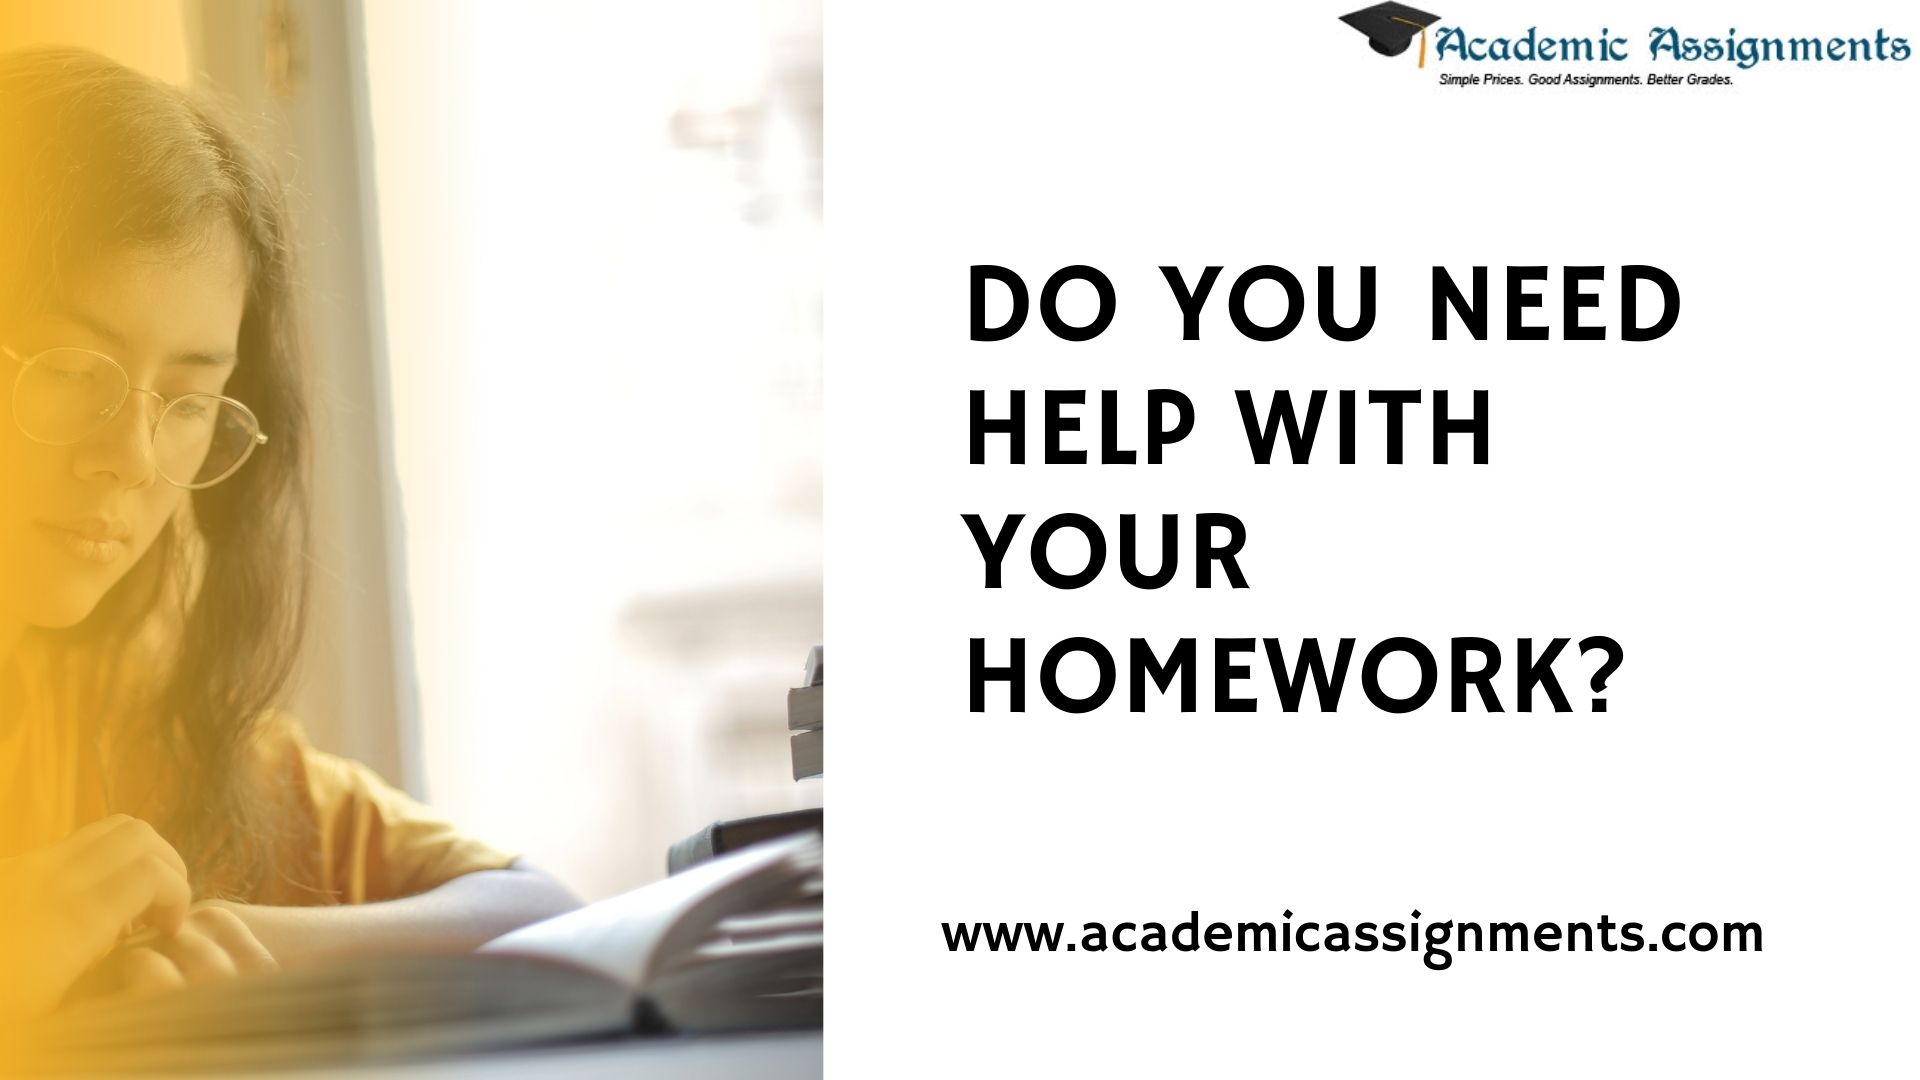 DO YOU NEED HELP WITH YOUR HOMEWORK